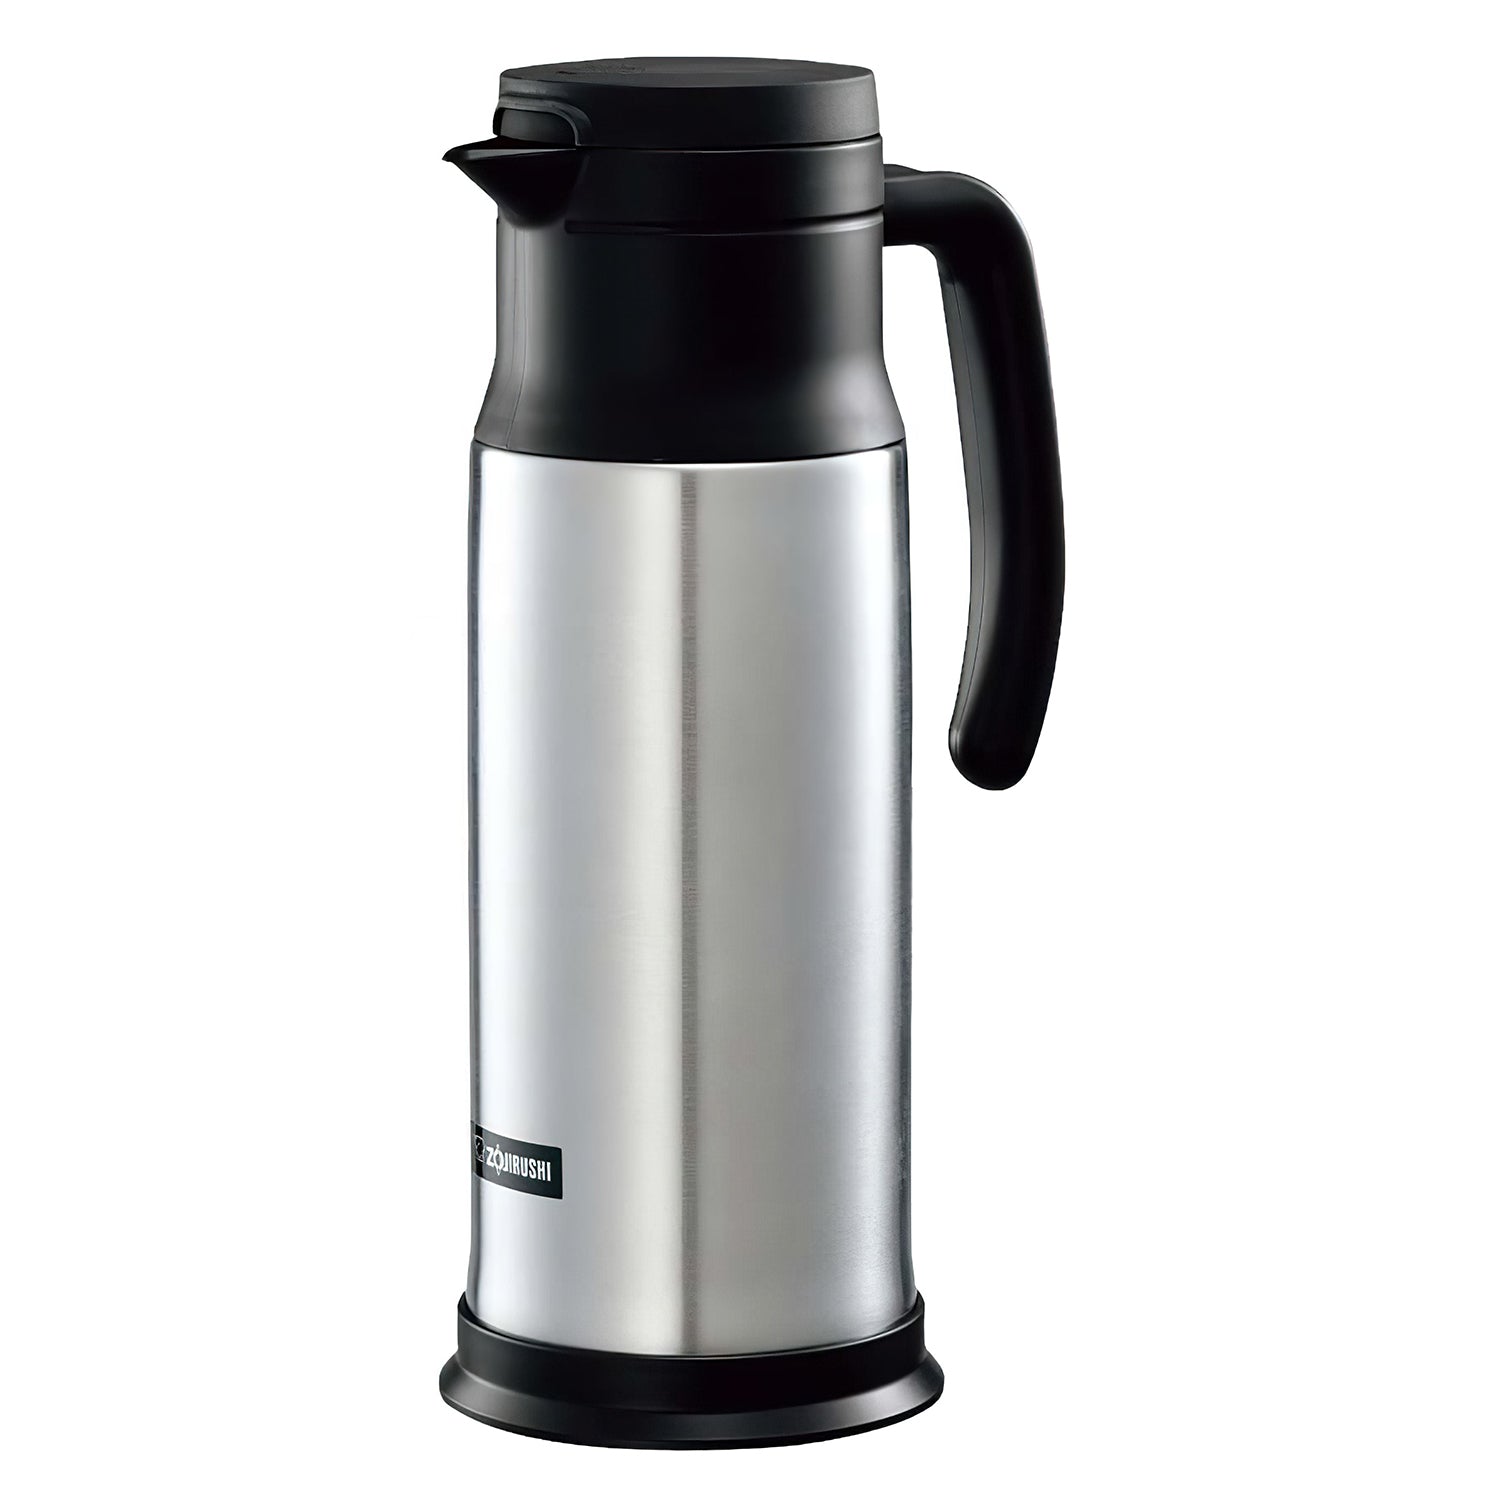 https://cdn.shopify.com/s/files/1/1610/3863/products/ZOJIRUSHIStainlessSteelWaterPitcher1LSH-MA10_1600x.jpg?v=1659054826